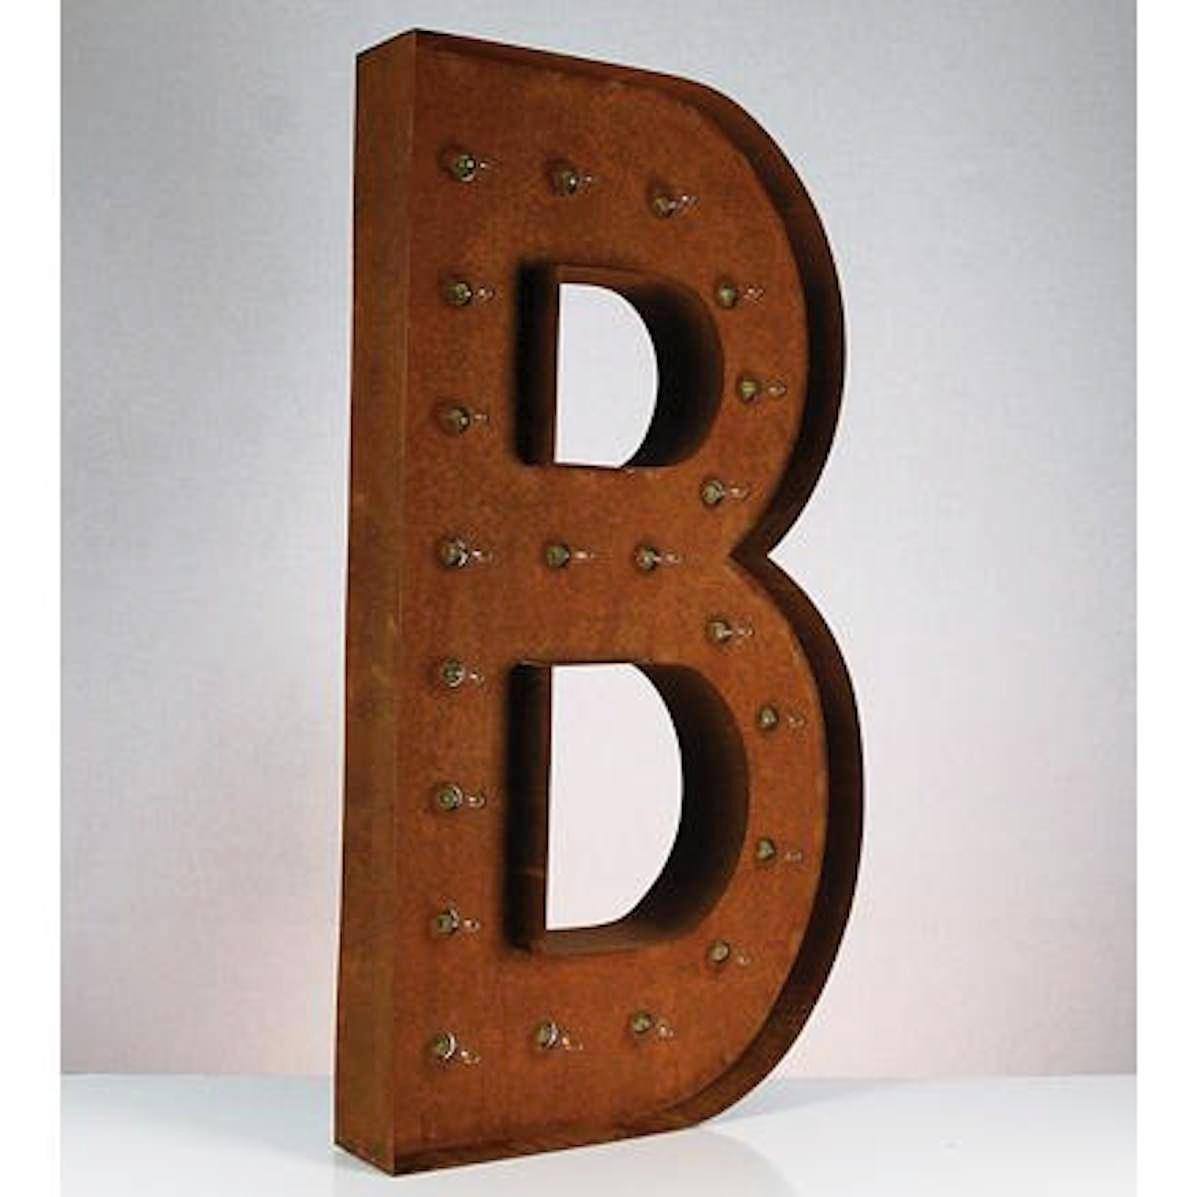 https://www.therustymarquee.com/cdn/shop/products/36-marquee-letter-lights-36-letter-b-lighted-vintage-marquee-letters-rustic-3_2000x.jpg?v=1555967411